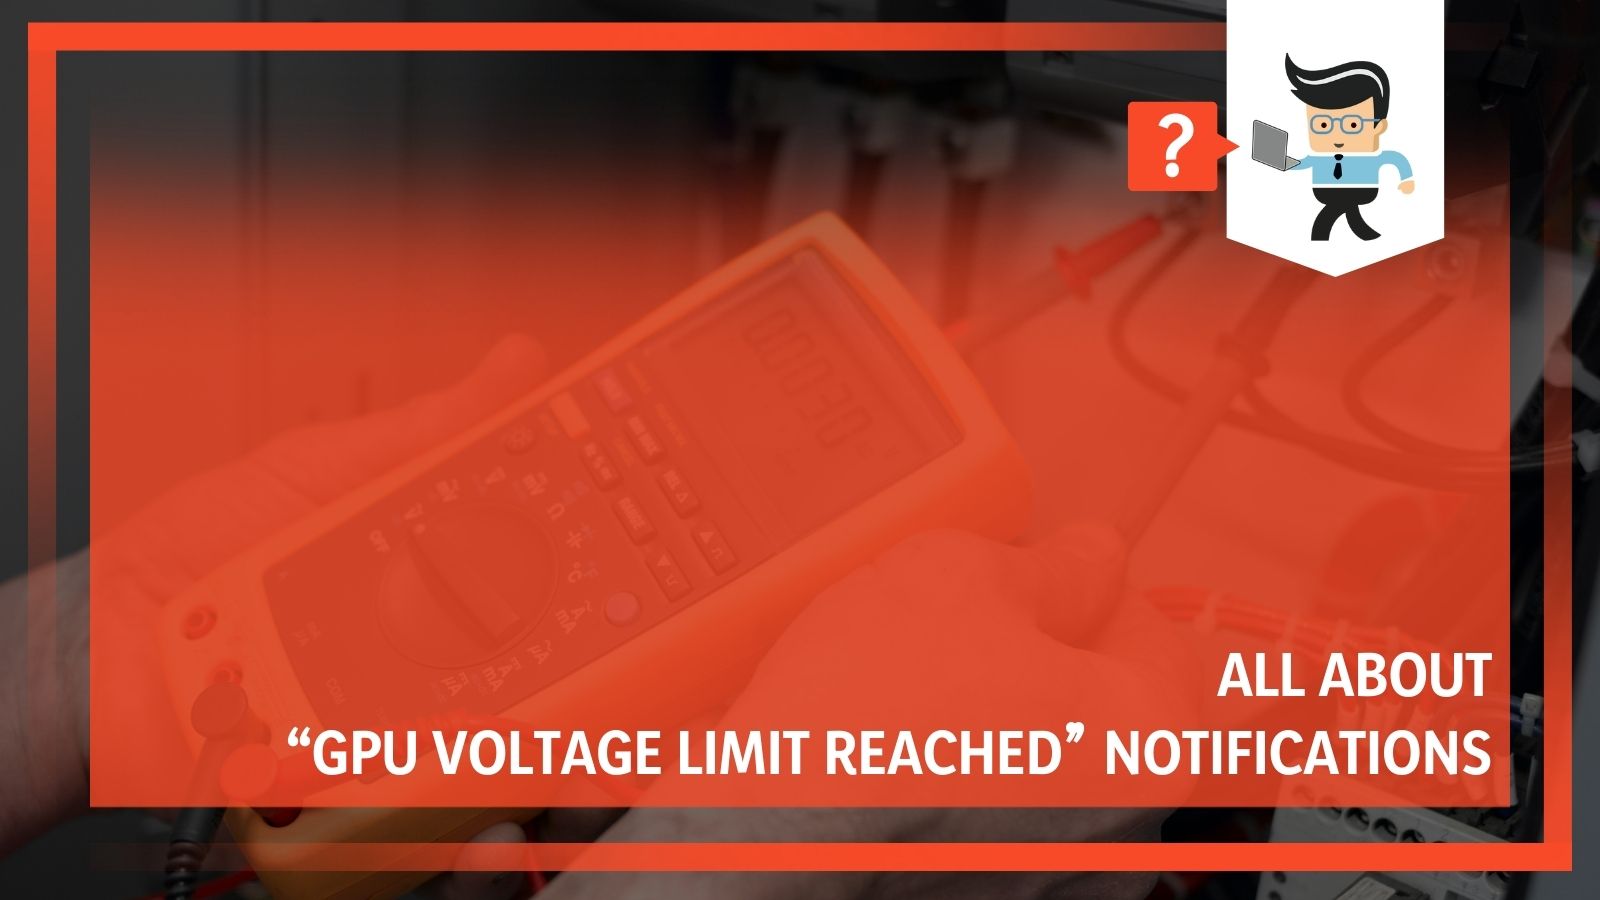 All About “GPU Voltage Limit Reached” Notifications